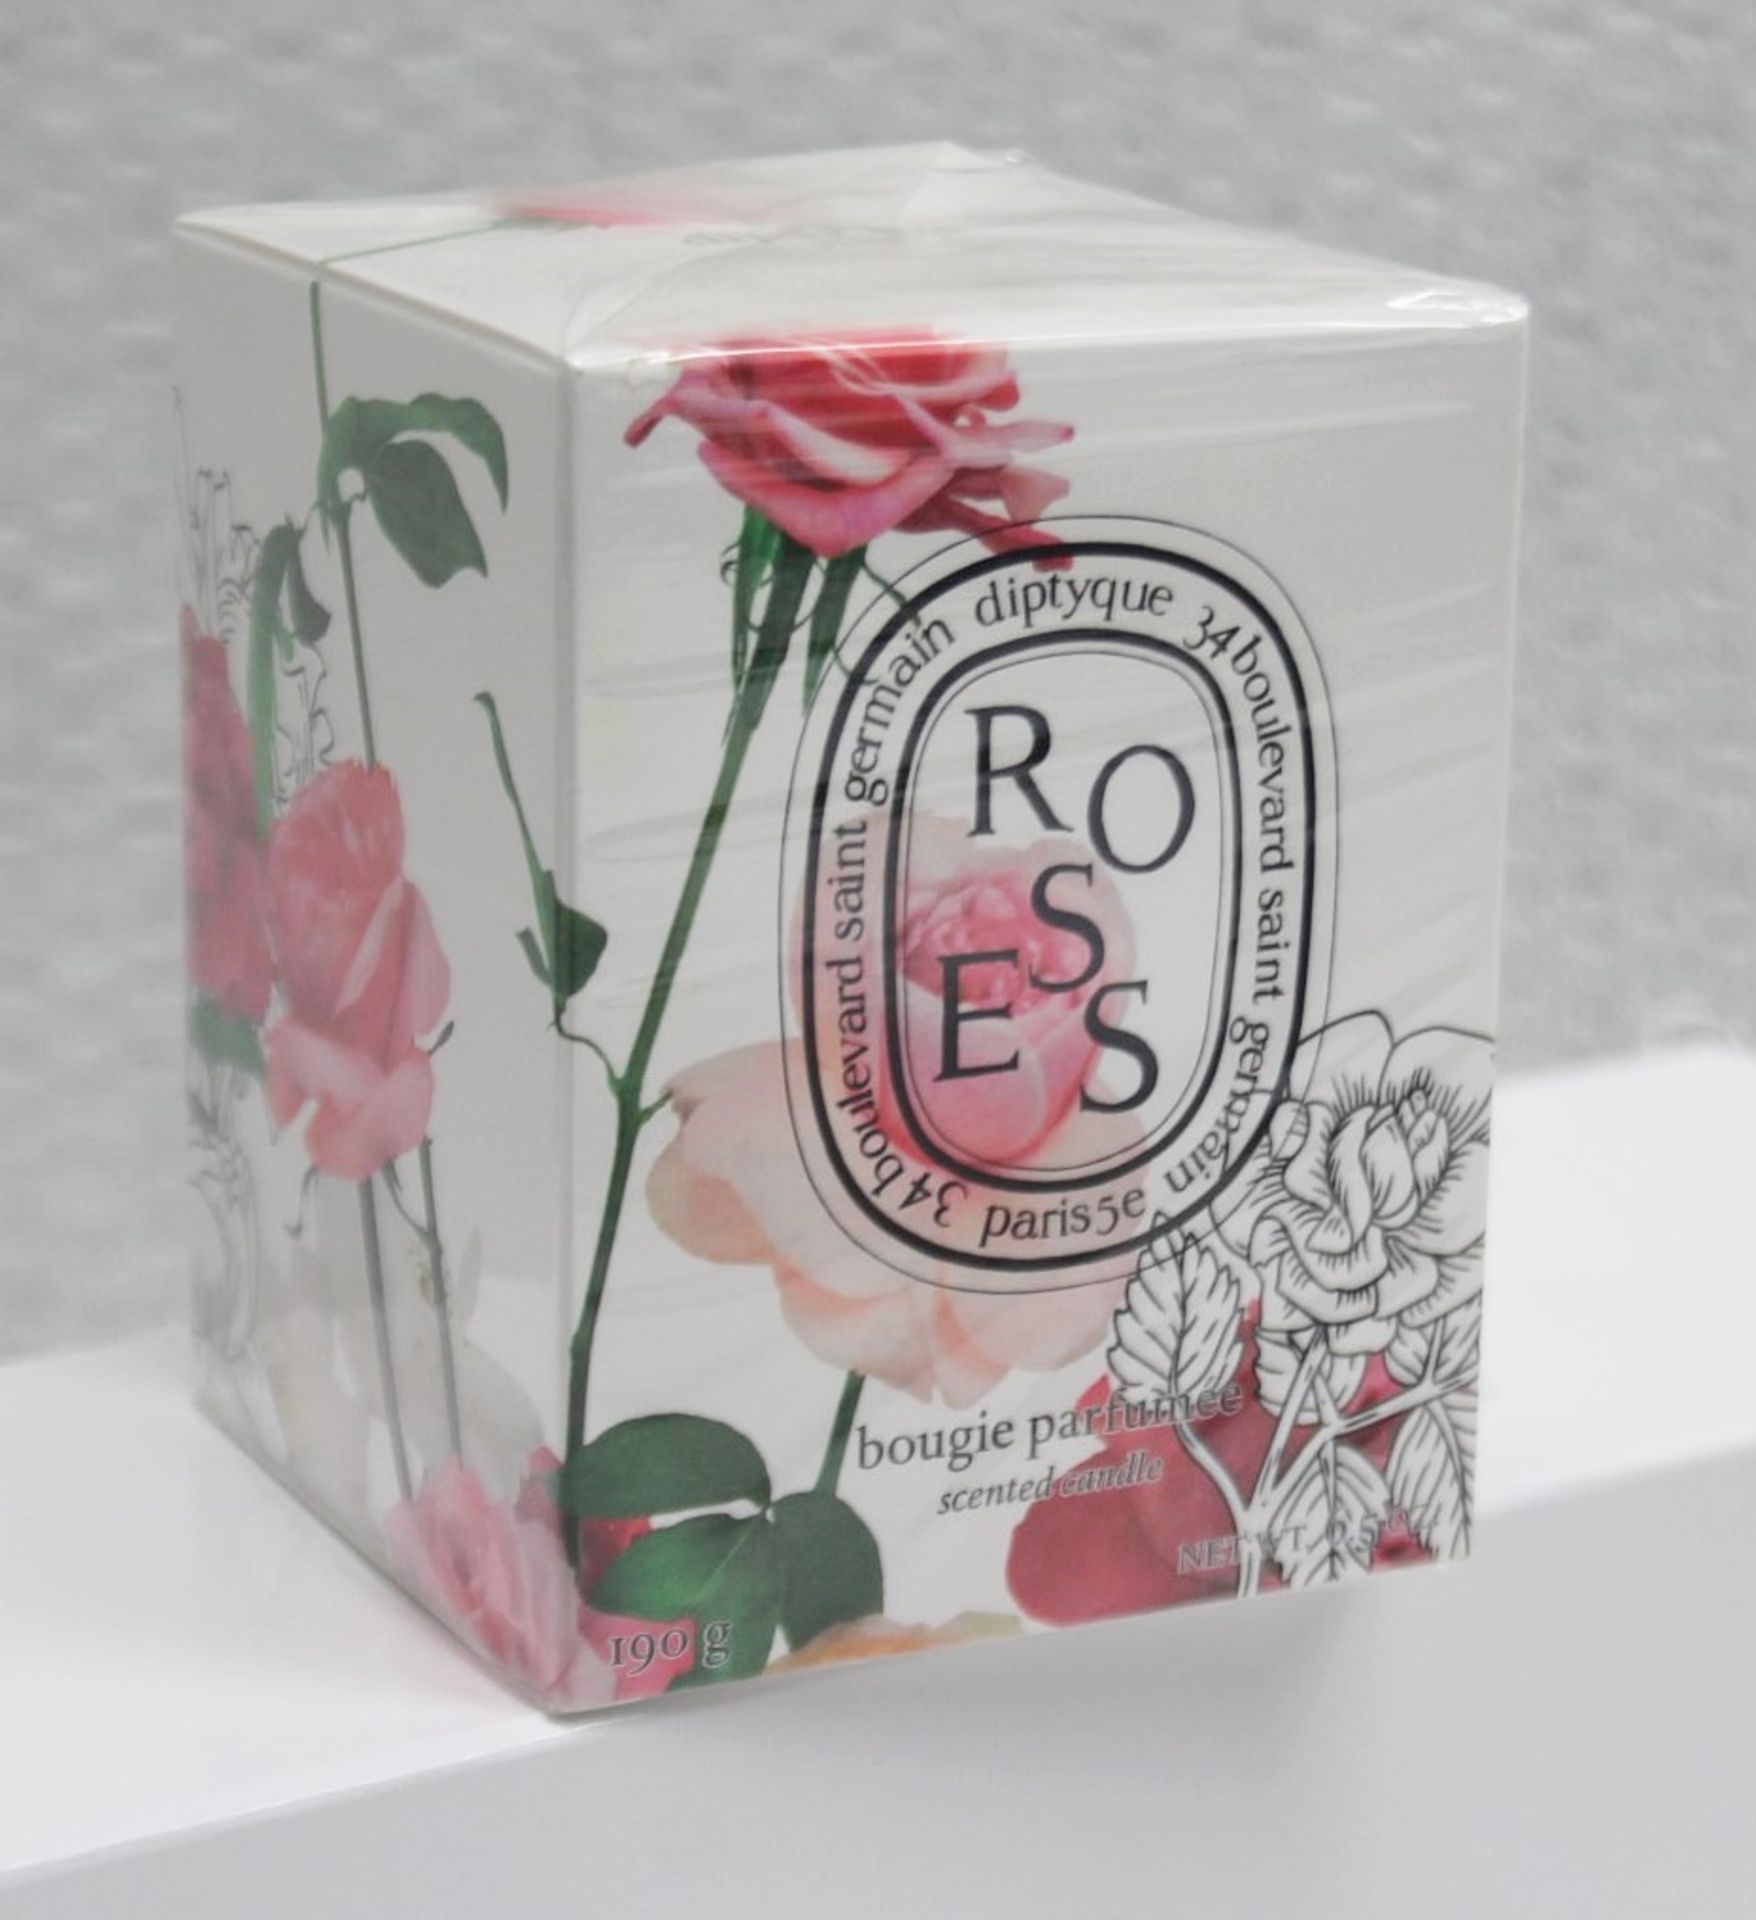 1 x DIPTYQUE Roses Candle 190G 21 - Original Price £60.00 - Sealed / Boxed Stock - Ref: 7096865/